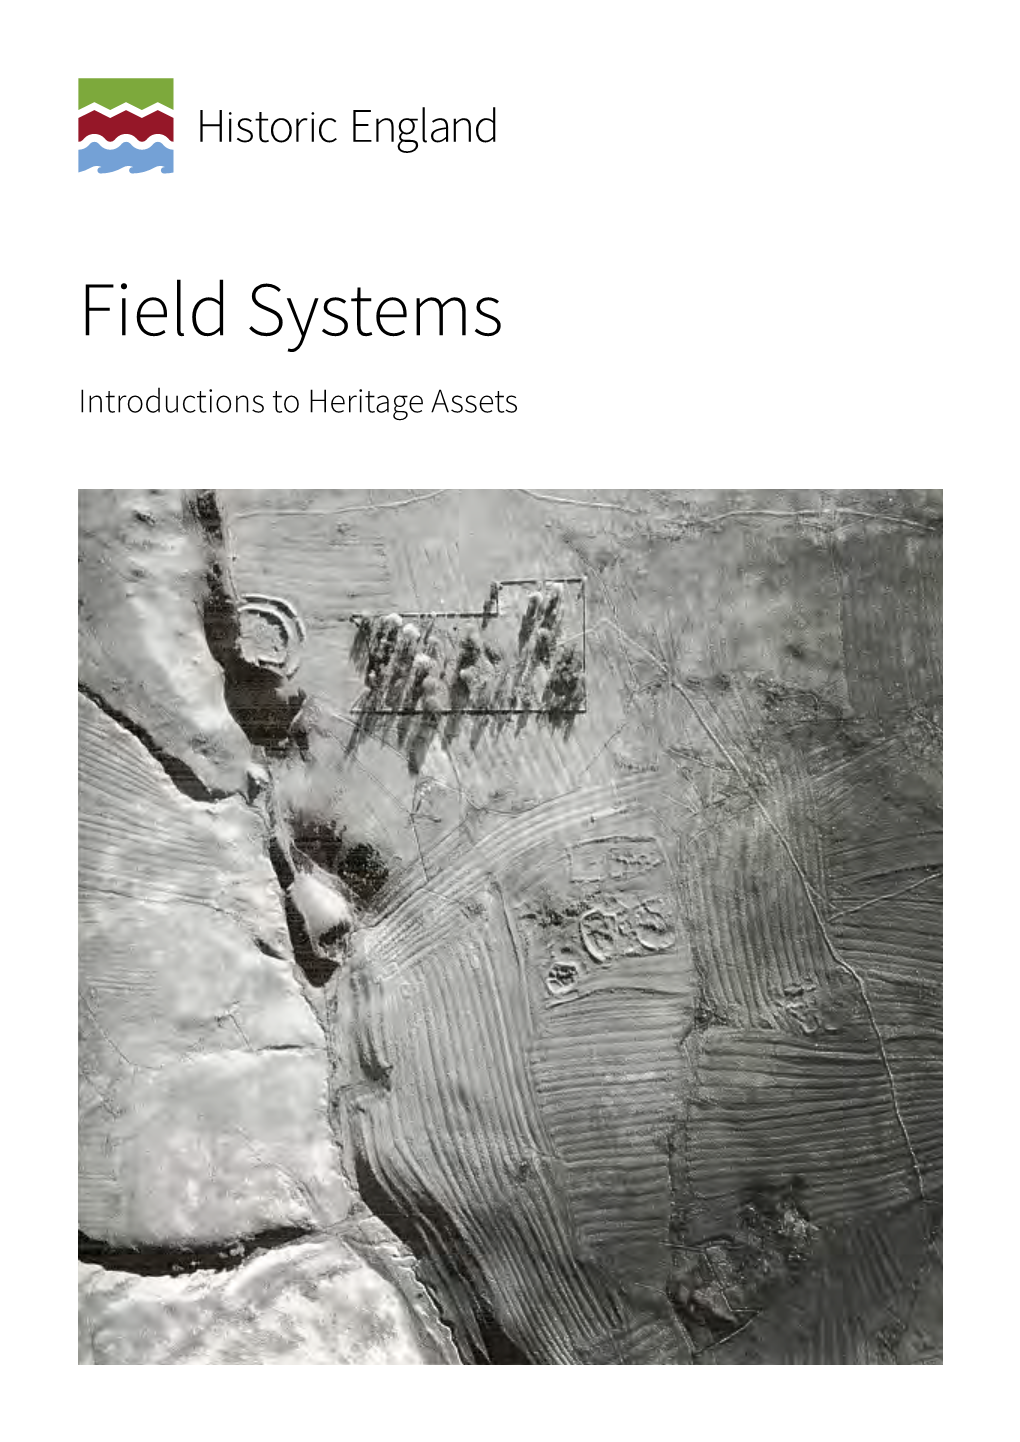 Introductions to Heritage Assets: Field Systems